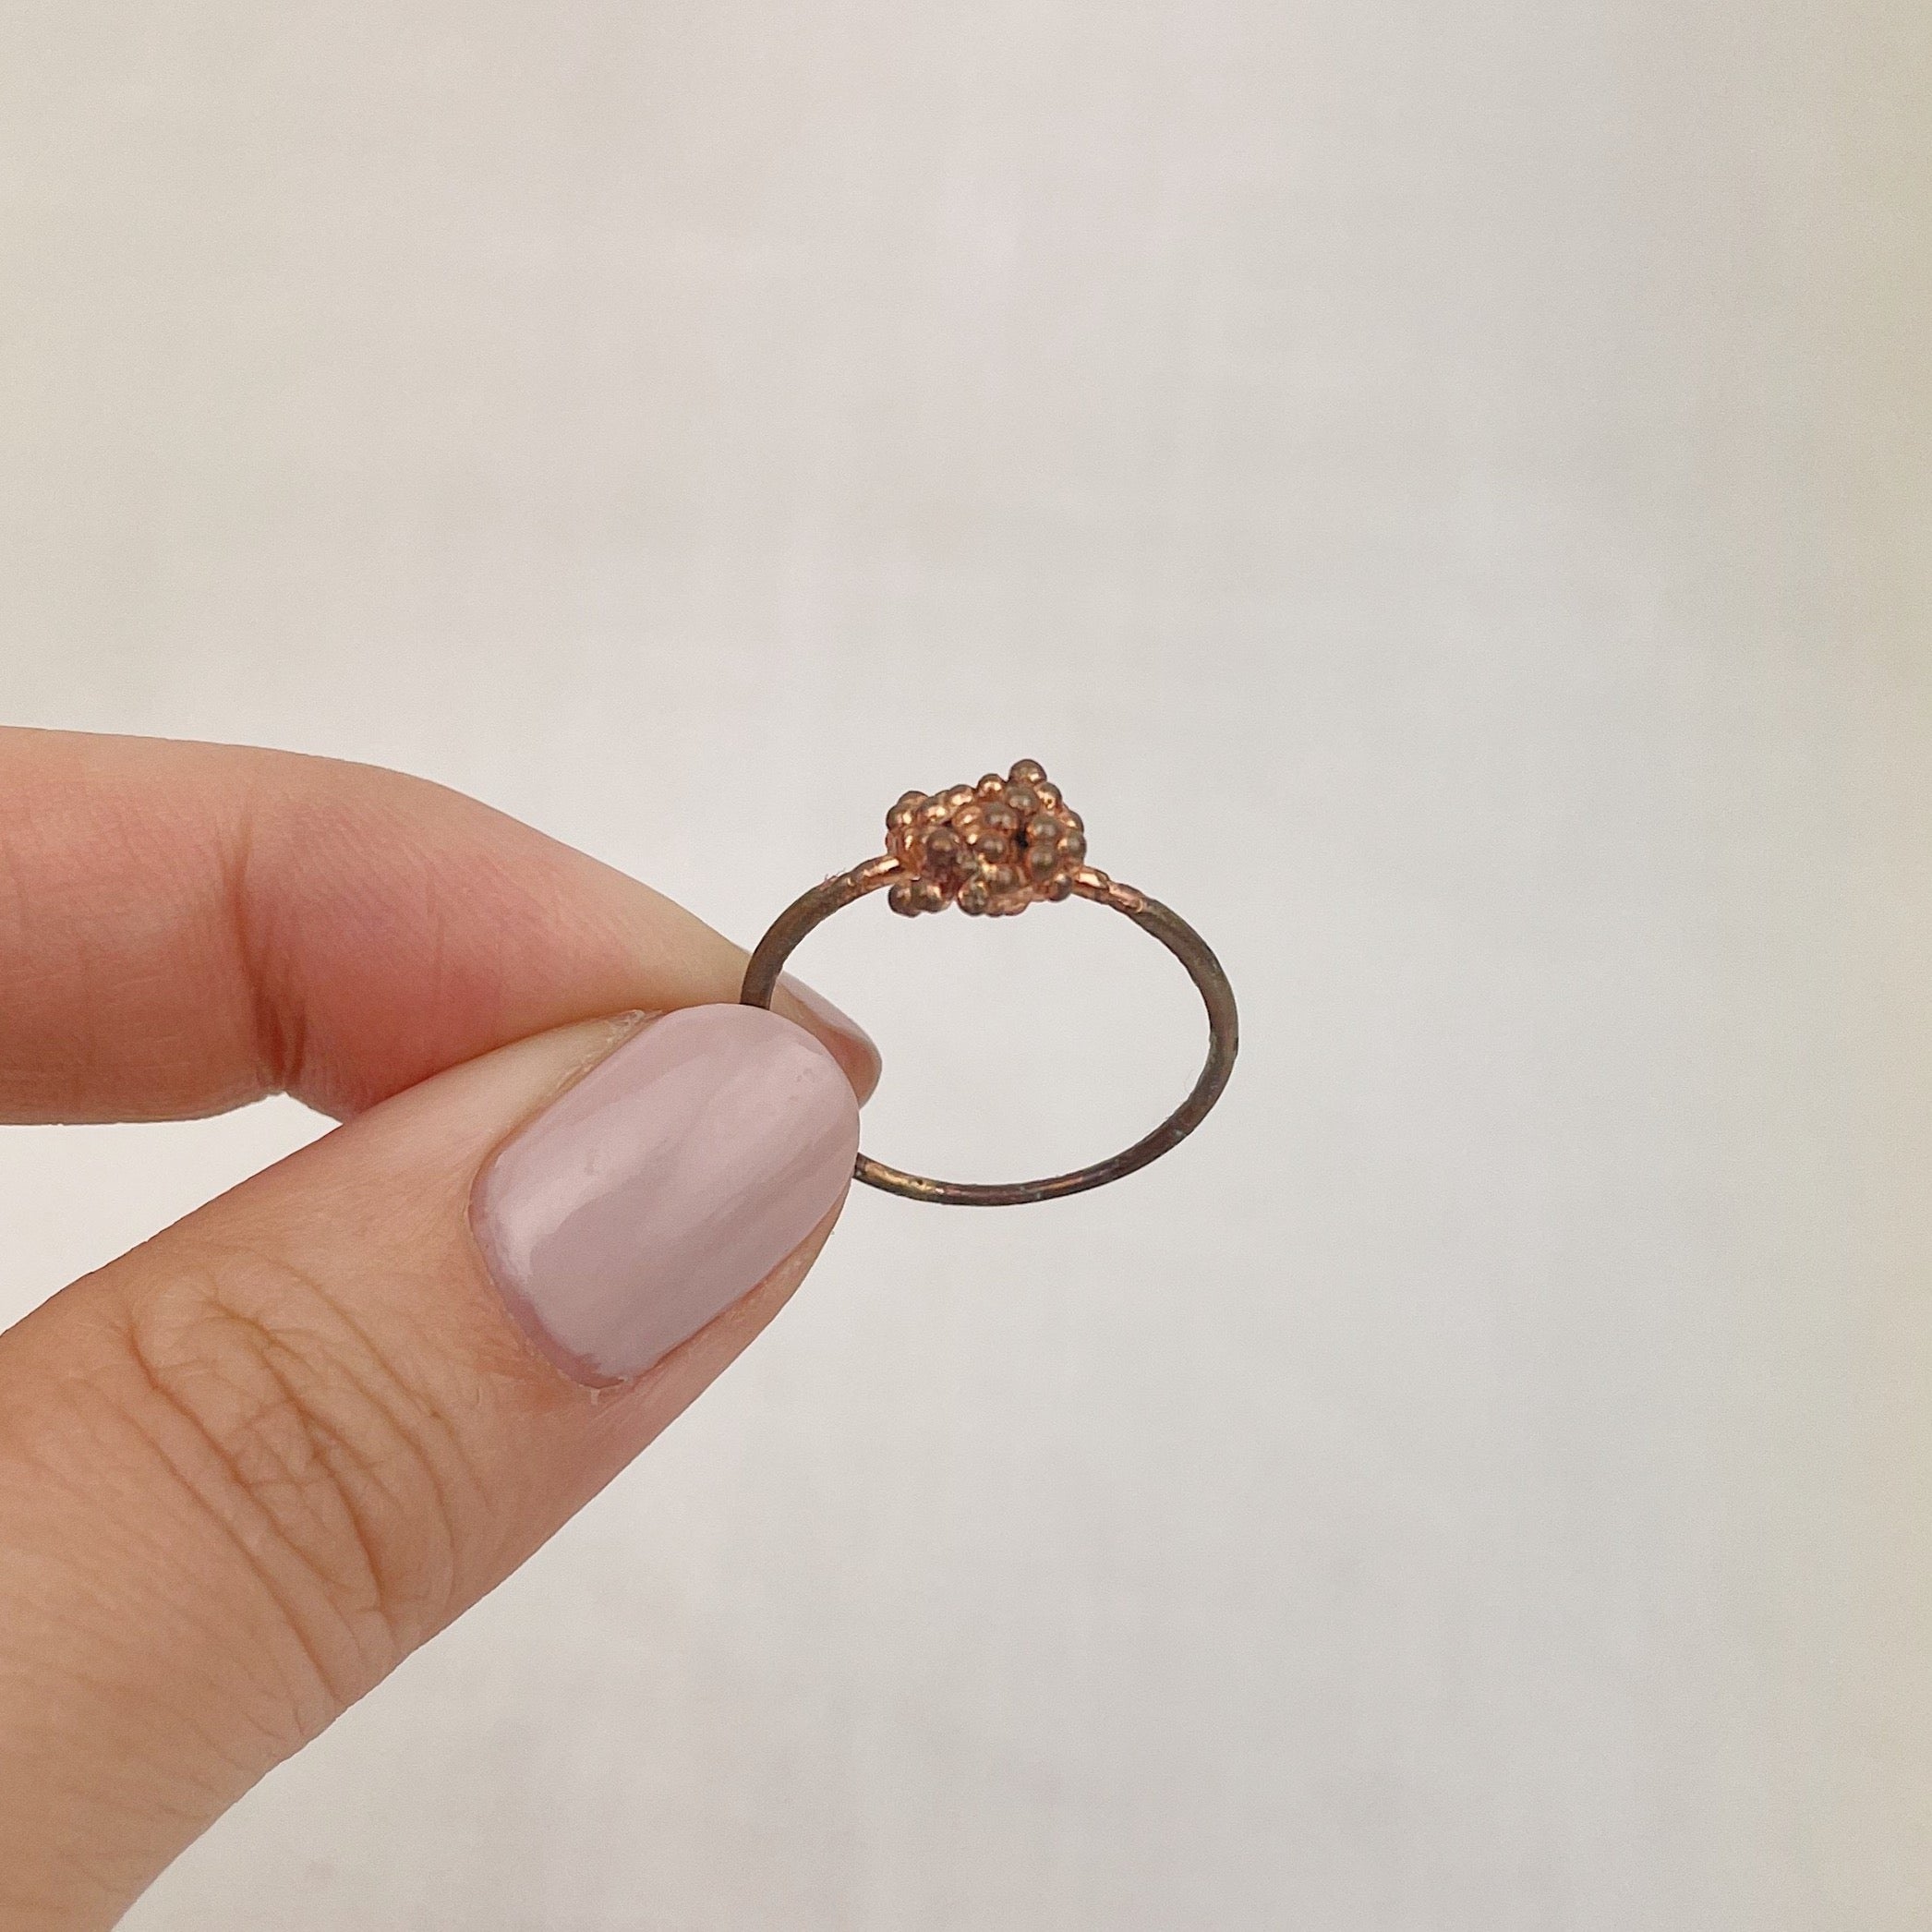 Copper ring - size O 1/2